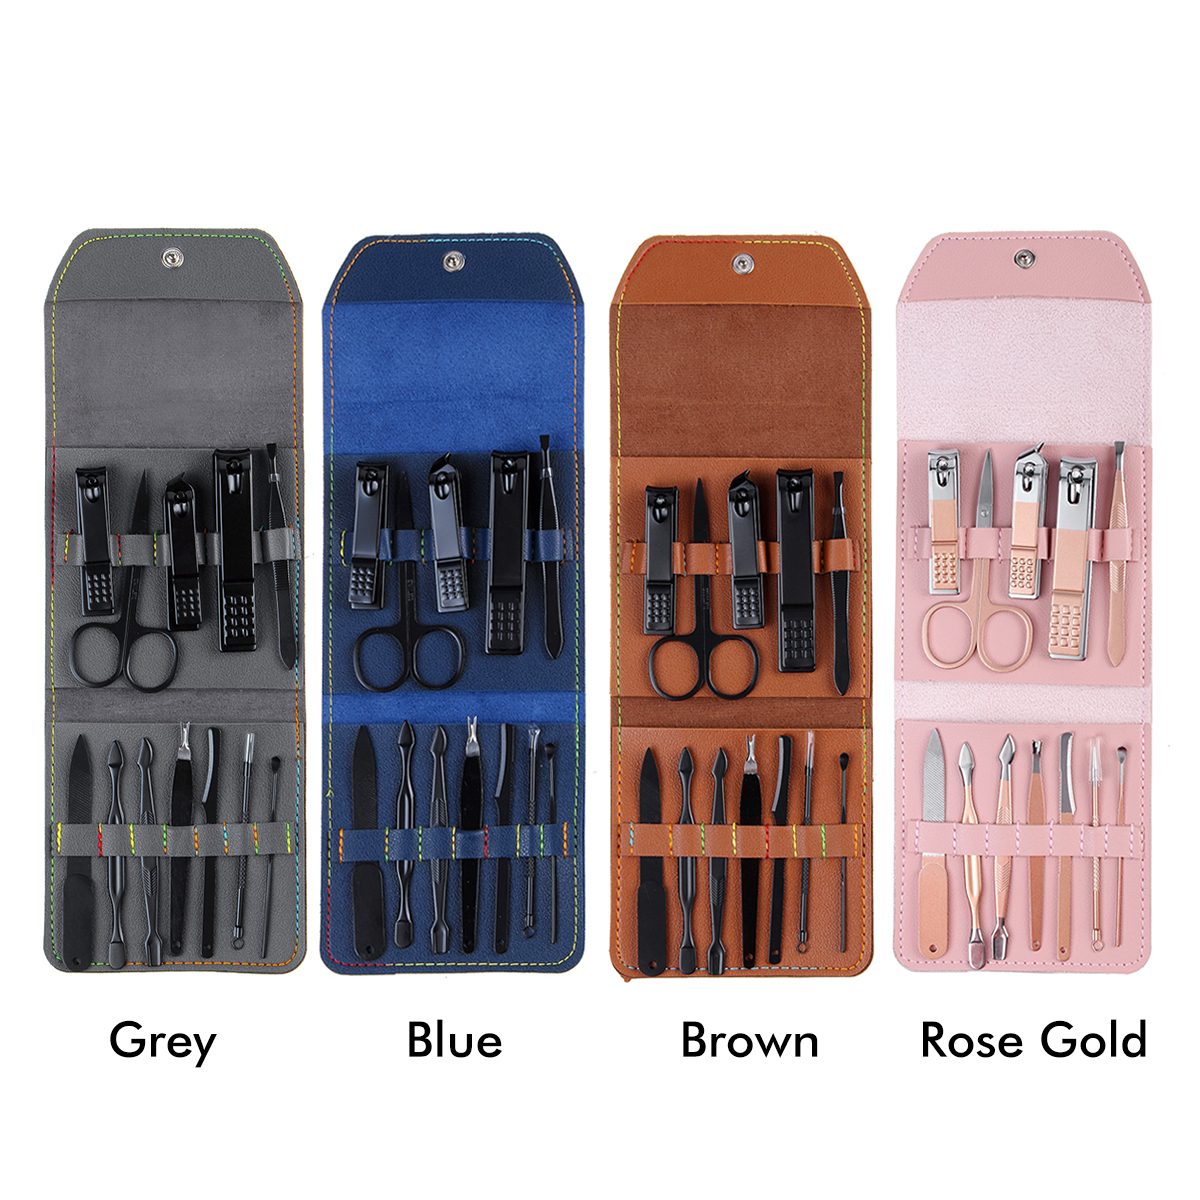 12PCS-Stainless-Steel-Pedicure-Nail-Clipper-Set-Professional-Manicure-Beauty-Tools-Kit-Cuticle-Eagle-1709212-10